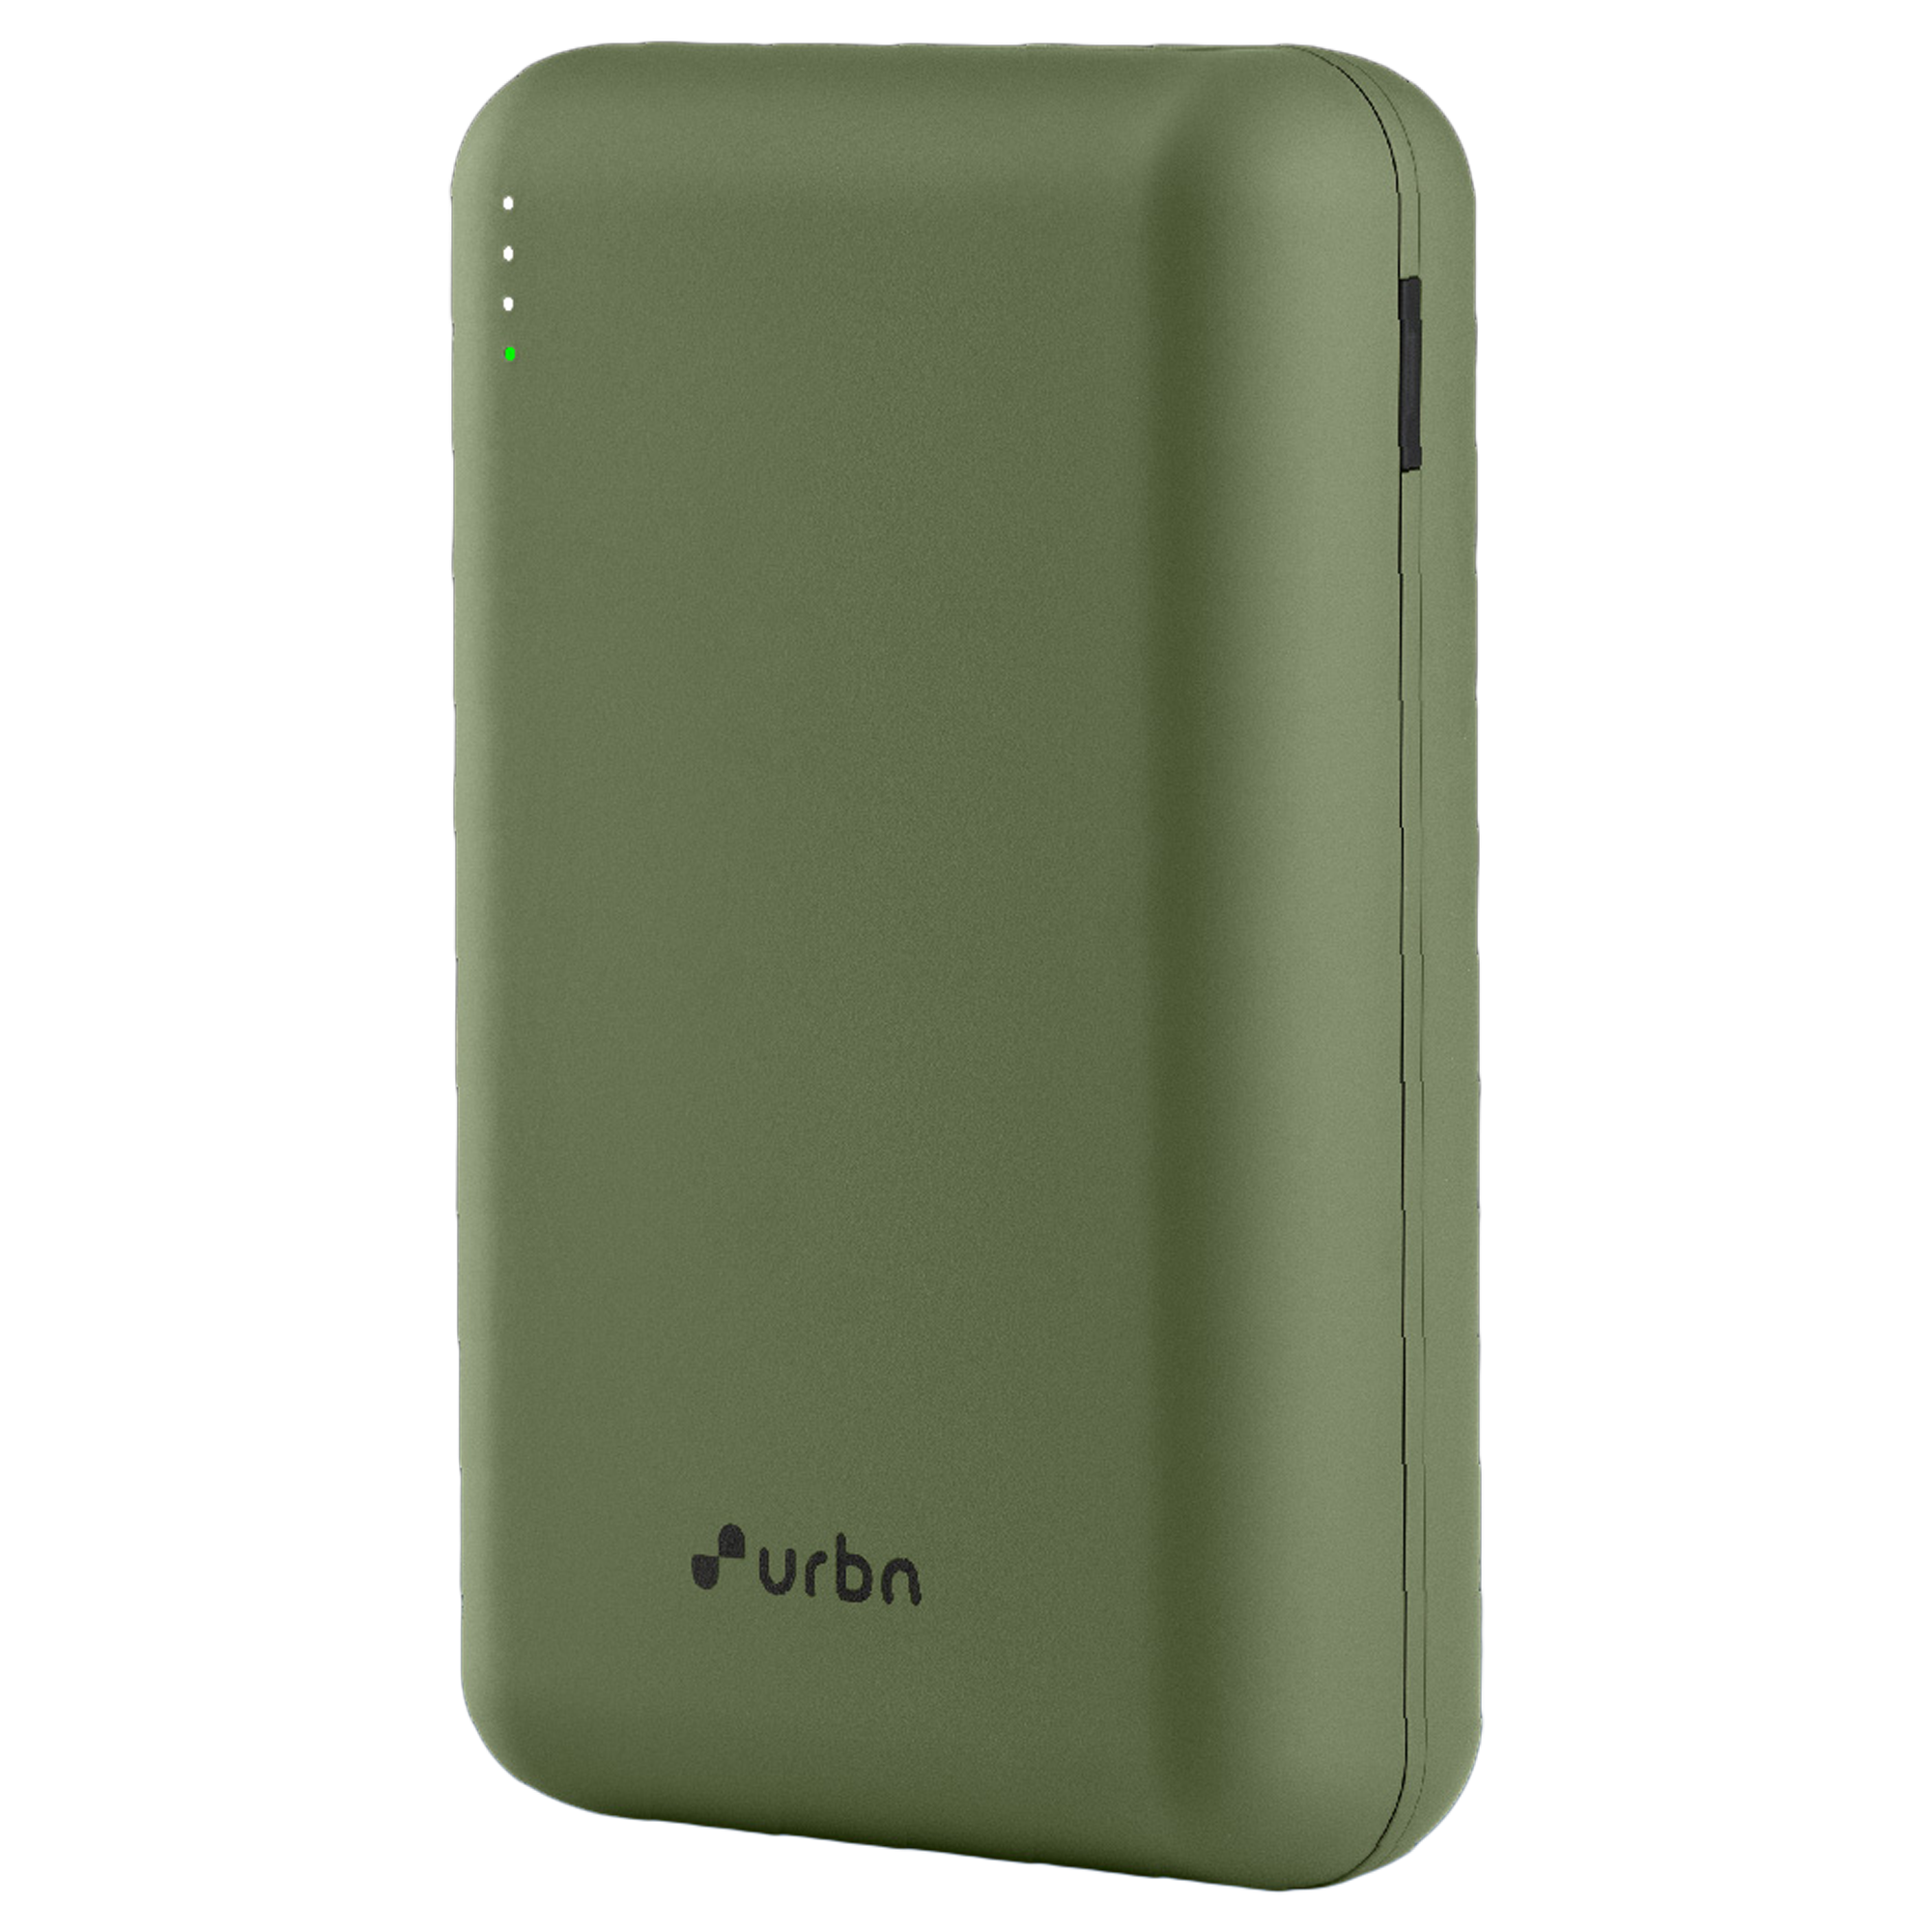 urbn 20000 mAh 22.5W Fast Charging Power Bank (1 Type A and 2 Type C Ports, 12 Layer Circuit Protection, Camo)